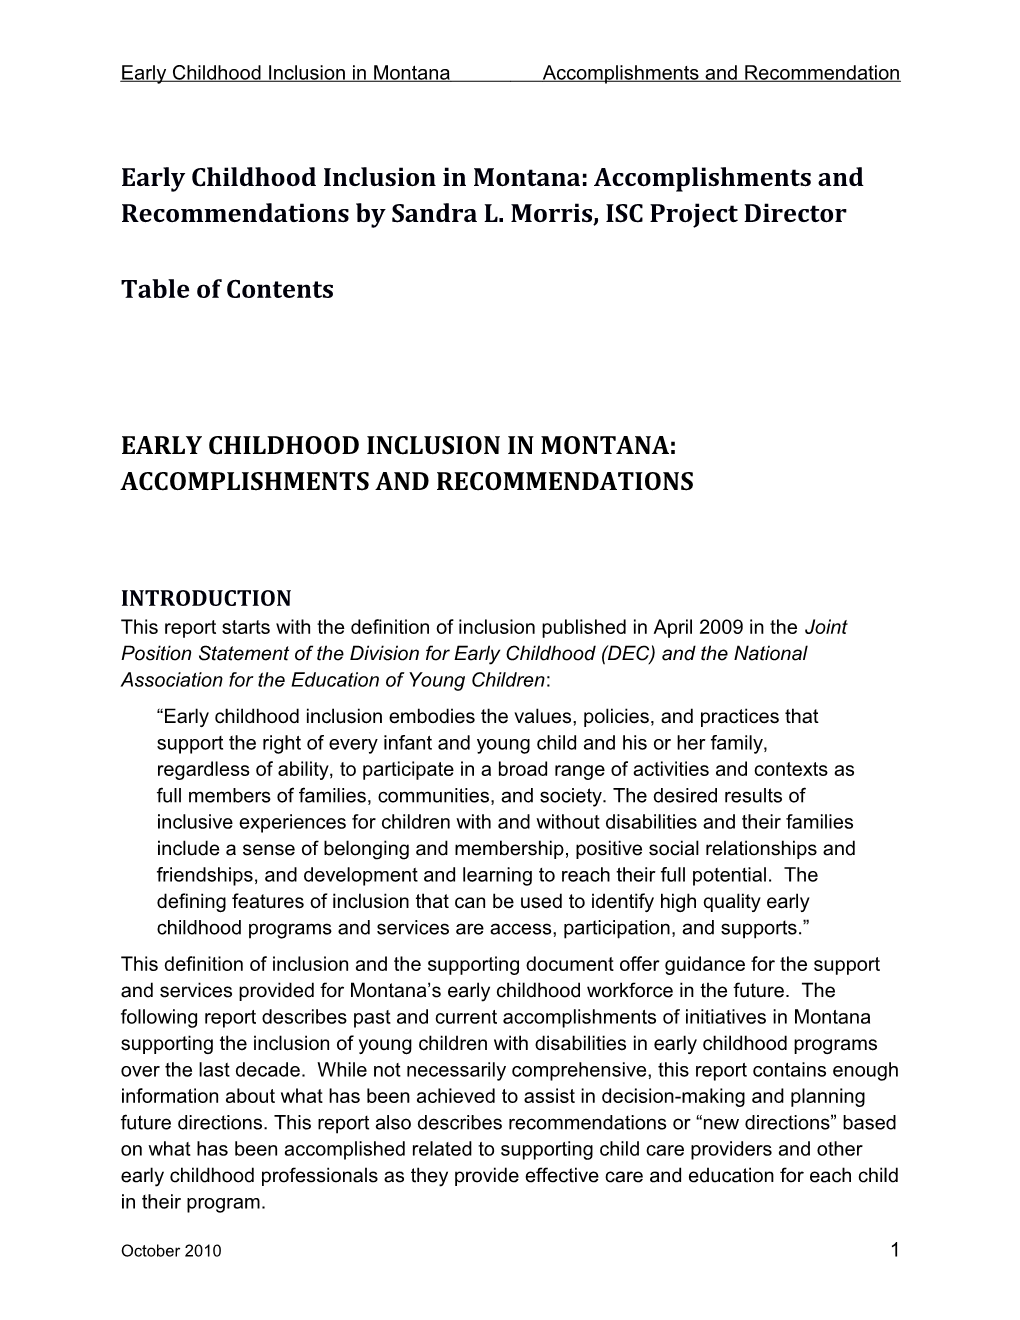 Early Childhood Inclusion in Montanaaccomplishments and Recommendation